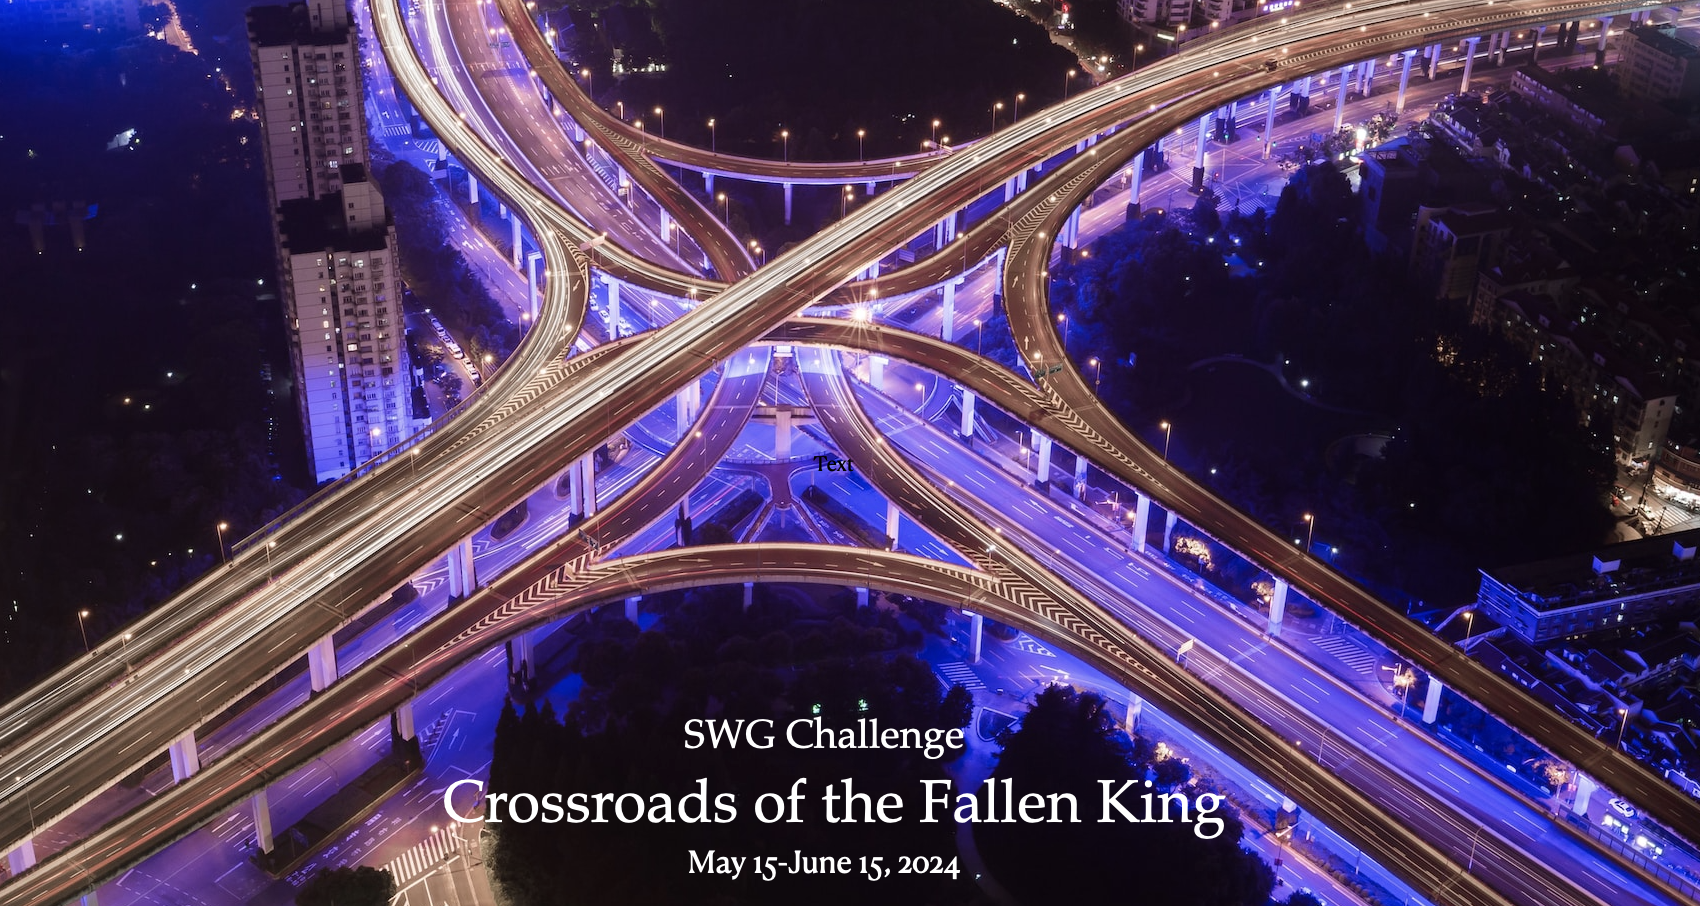 SWG Crossroads of the Fallen King challenge banner - aerial photo of an urban highway interchange at night and the text "SWG Challenge Crossroads of the Fallen King  May 15 - June 15 2024"